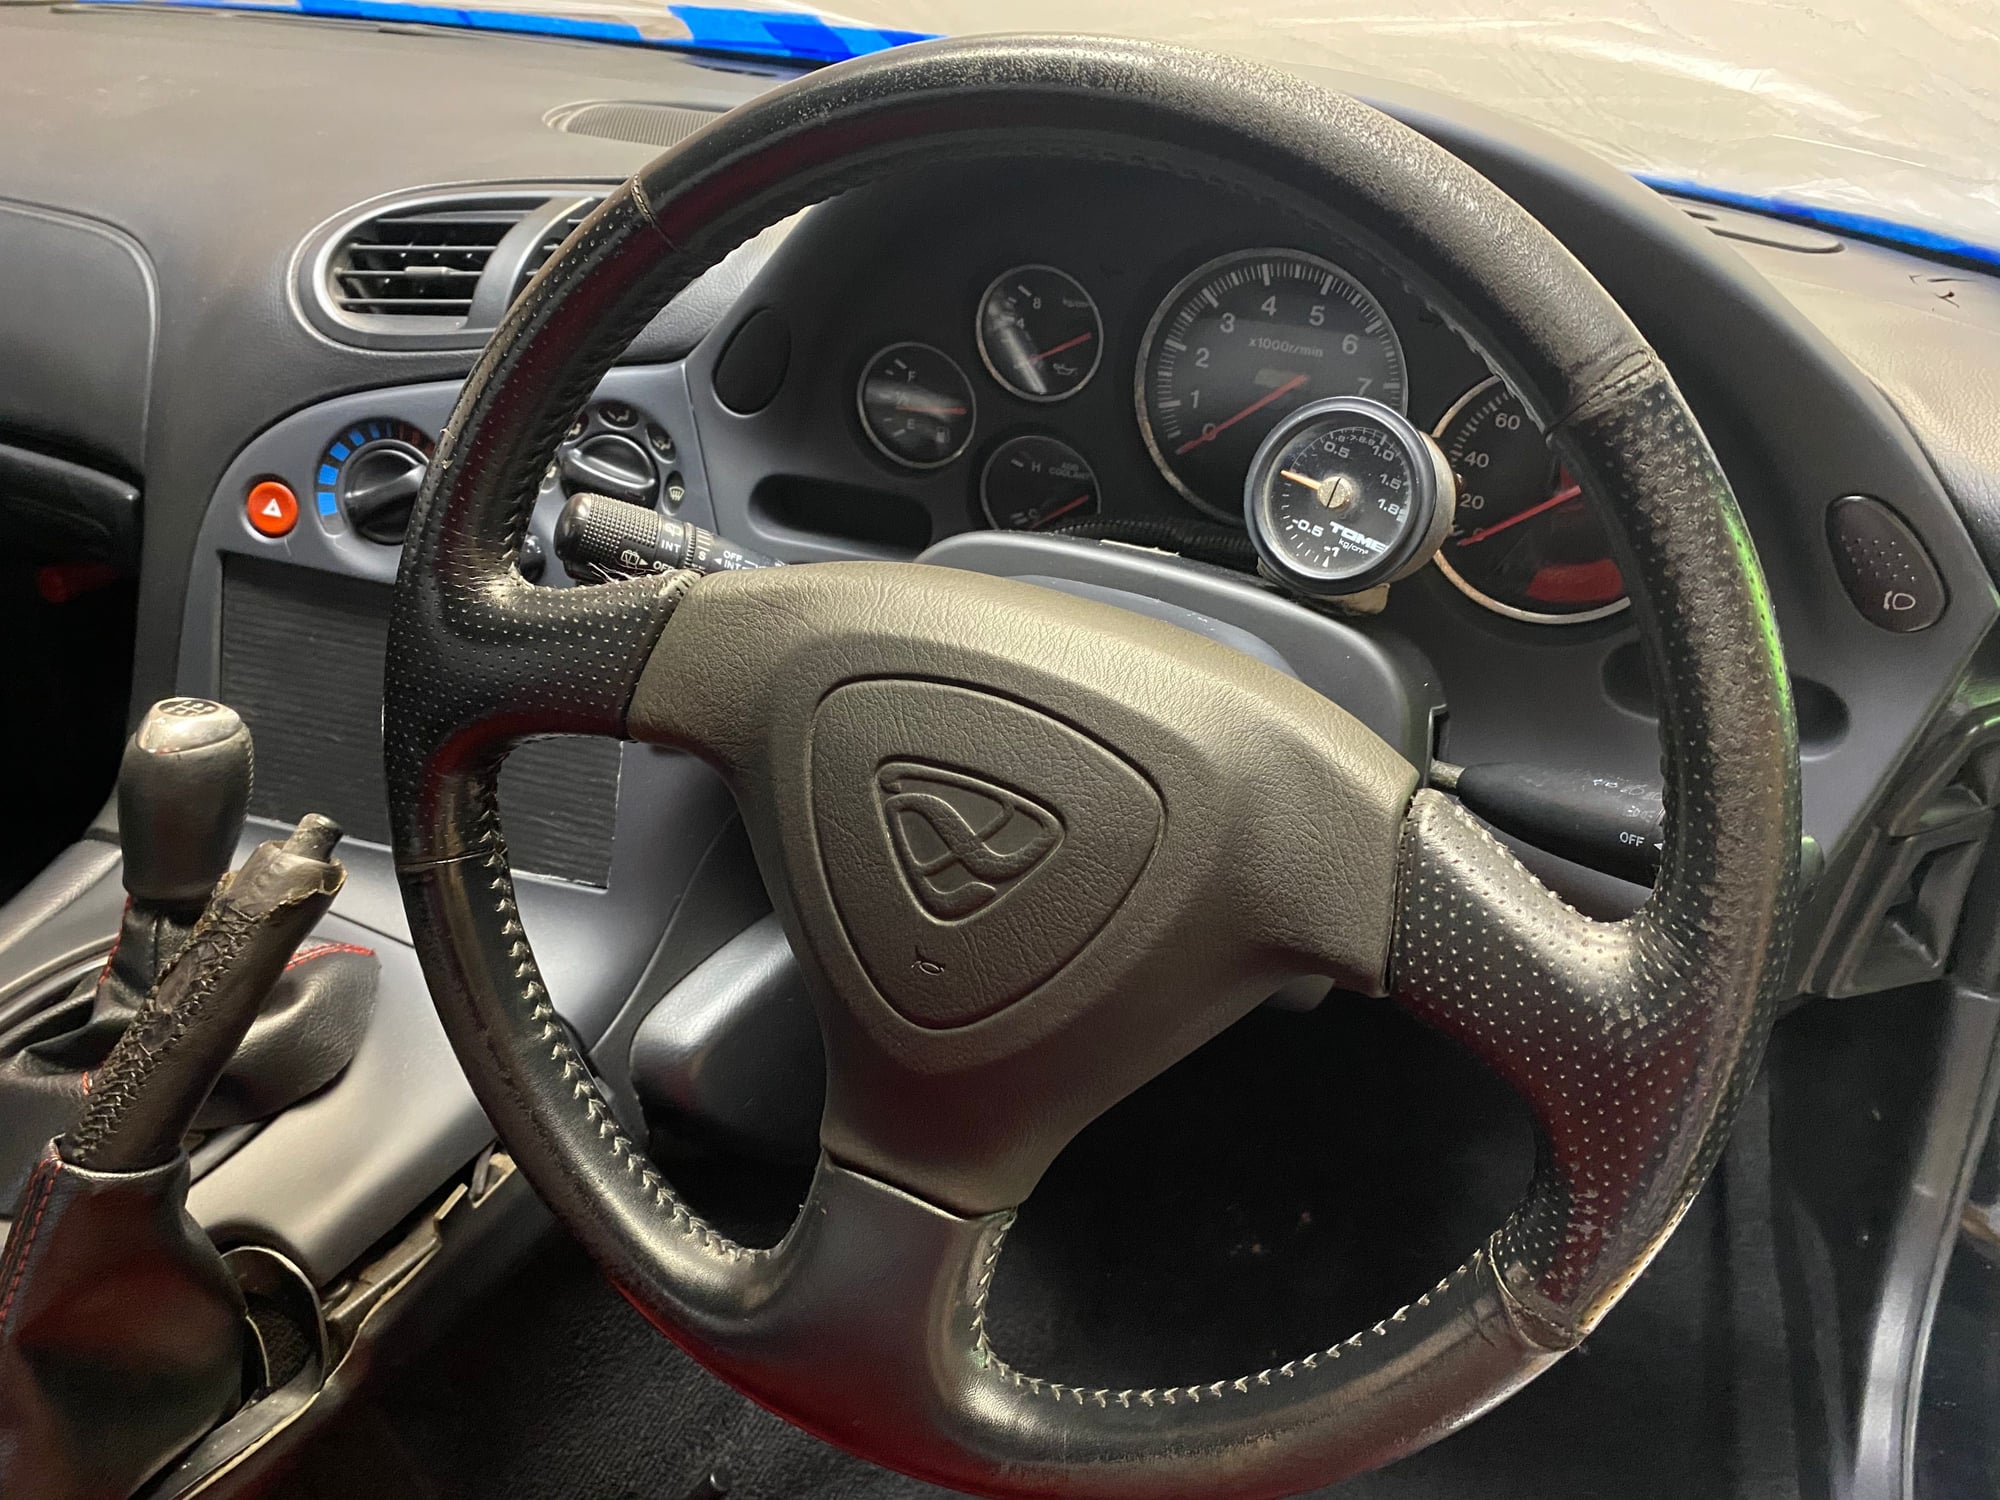 Accessories - Rx-7 FD EFINI OEM Leather Steering wheel. - Used - 1992 to 2002 Mazda RX-7 - Prince Frederick, MD 20678, United States